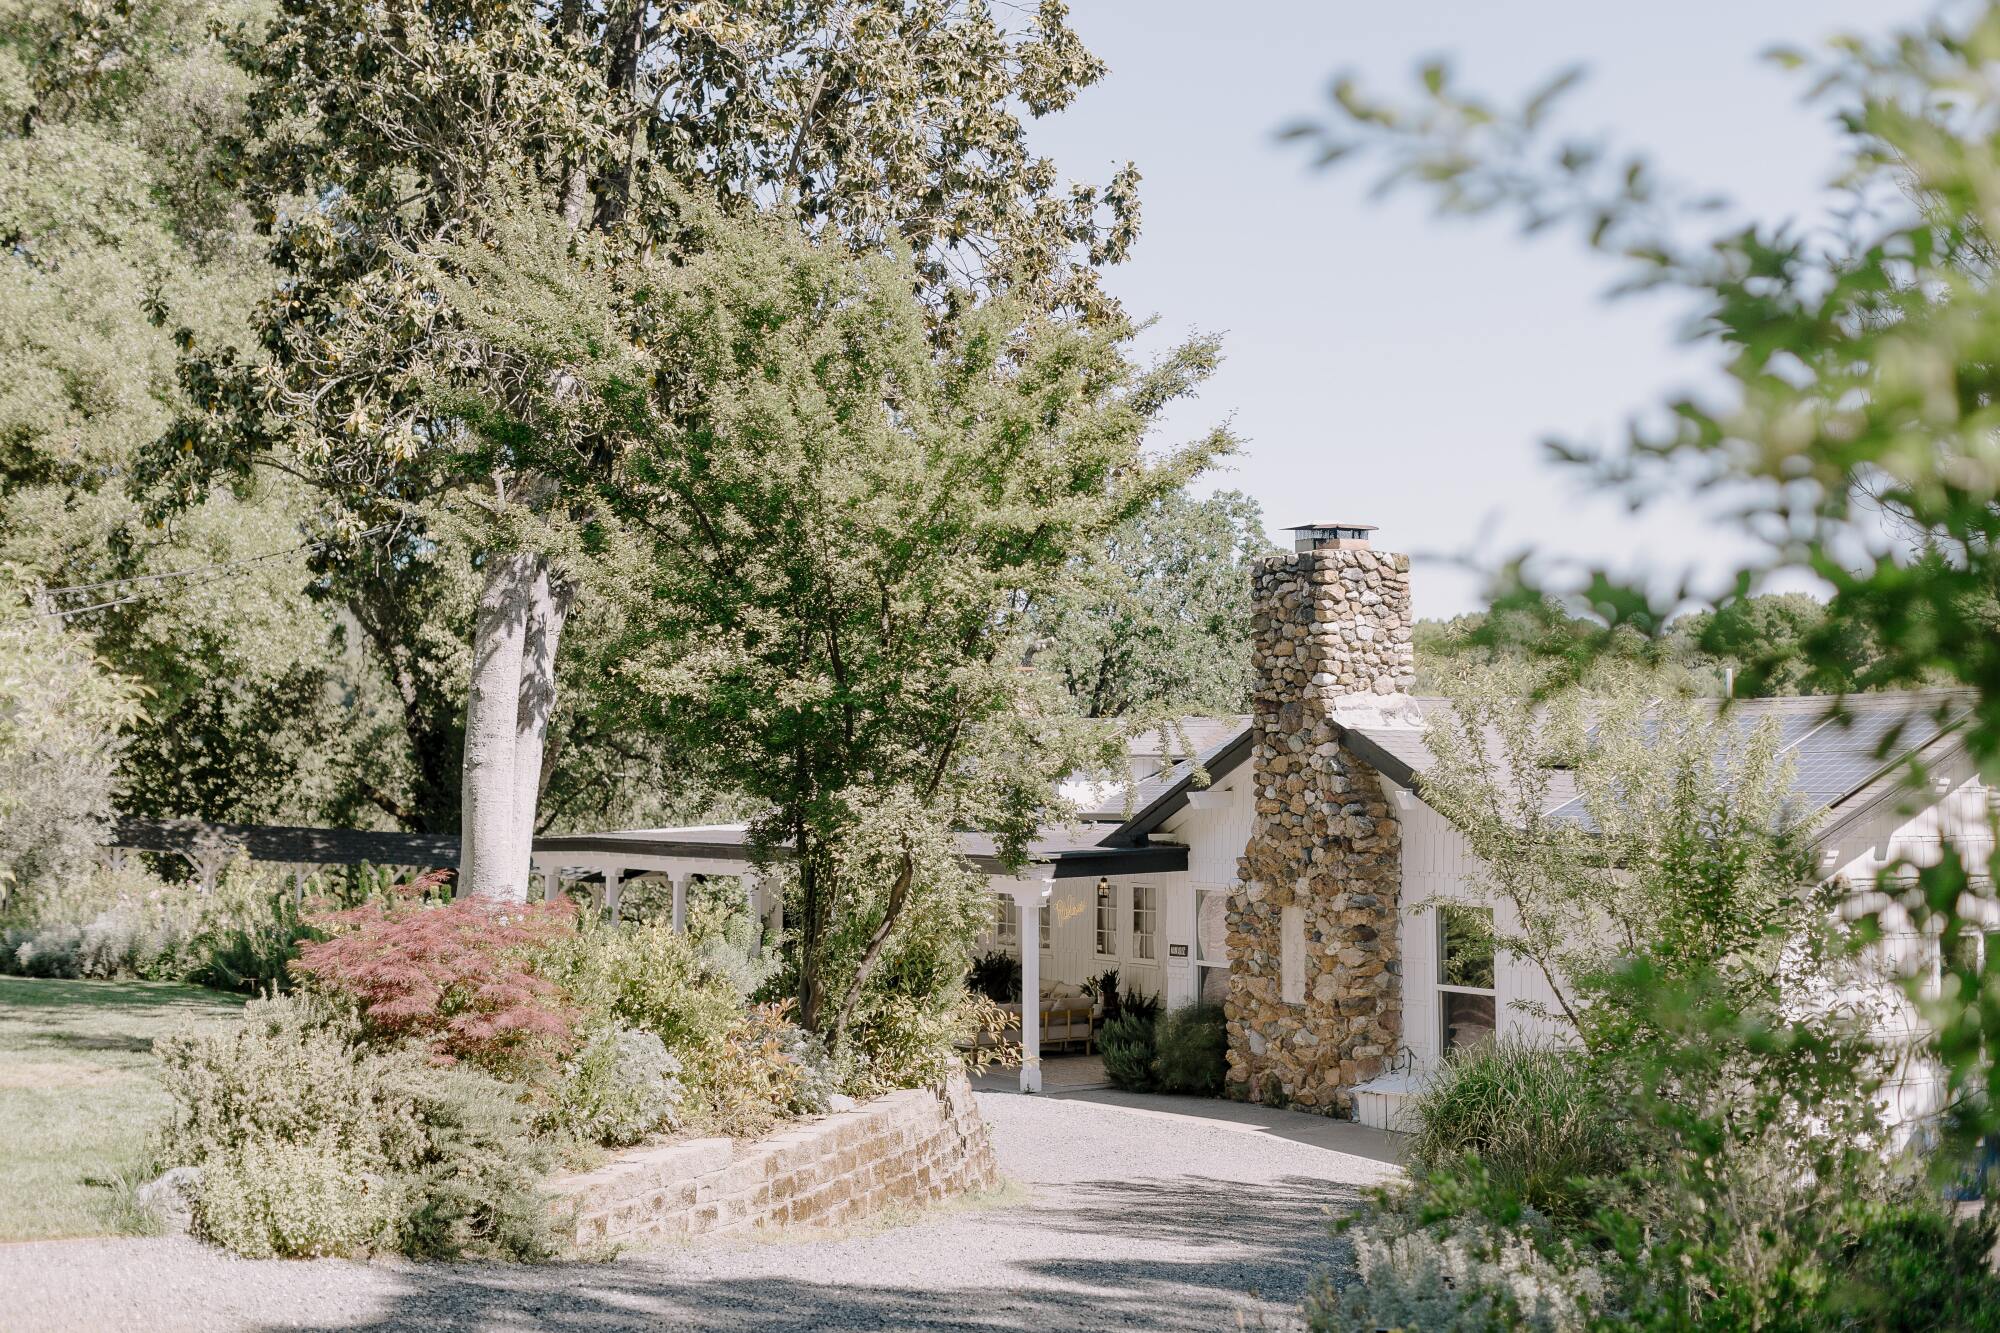 The view down a driveway past trees and shrubs to a white ranch-style house with a large stone chimney.